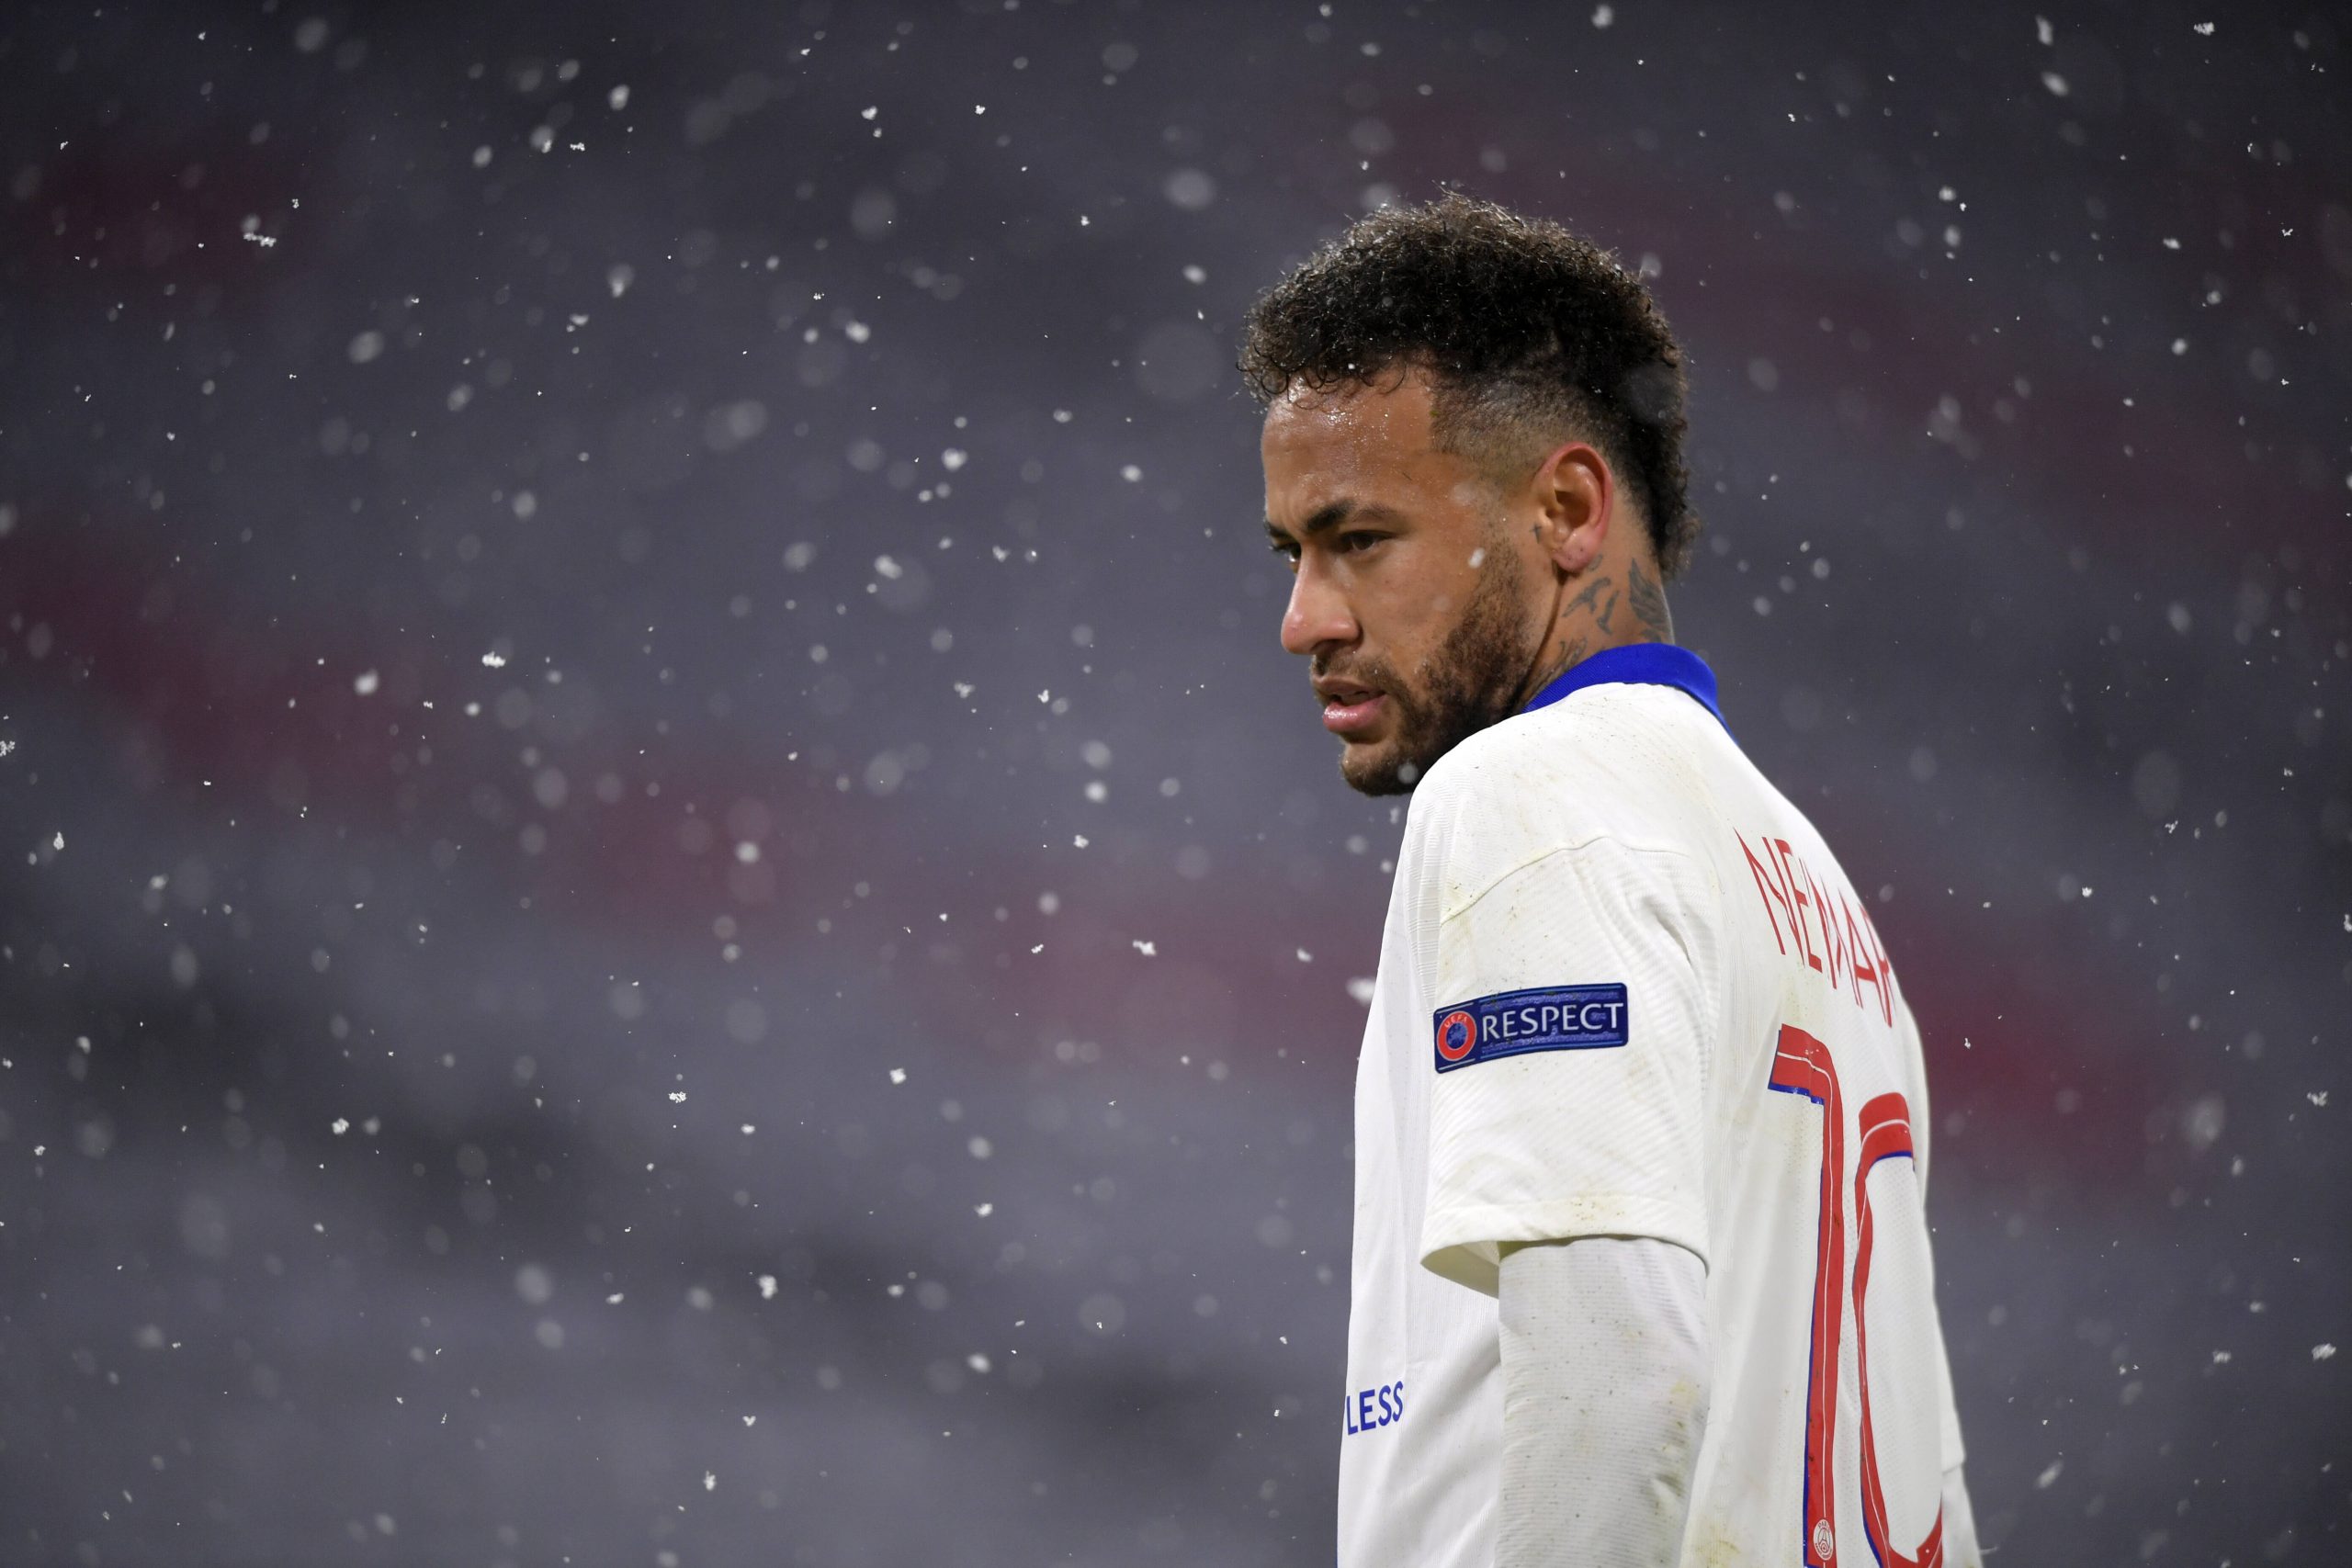 Chelsea are in pole position to sign PSG star forward Neymar Jr.